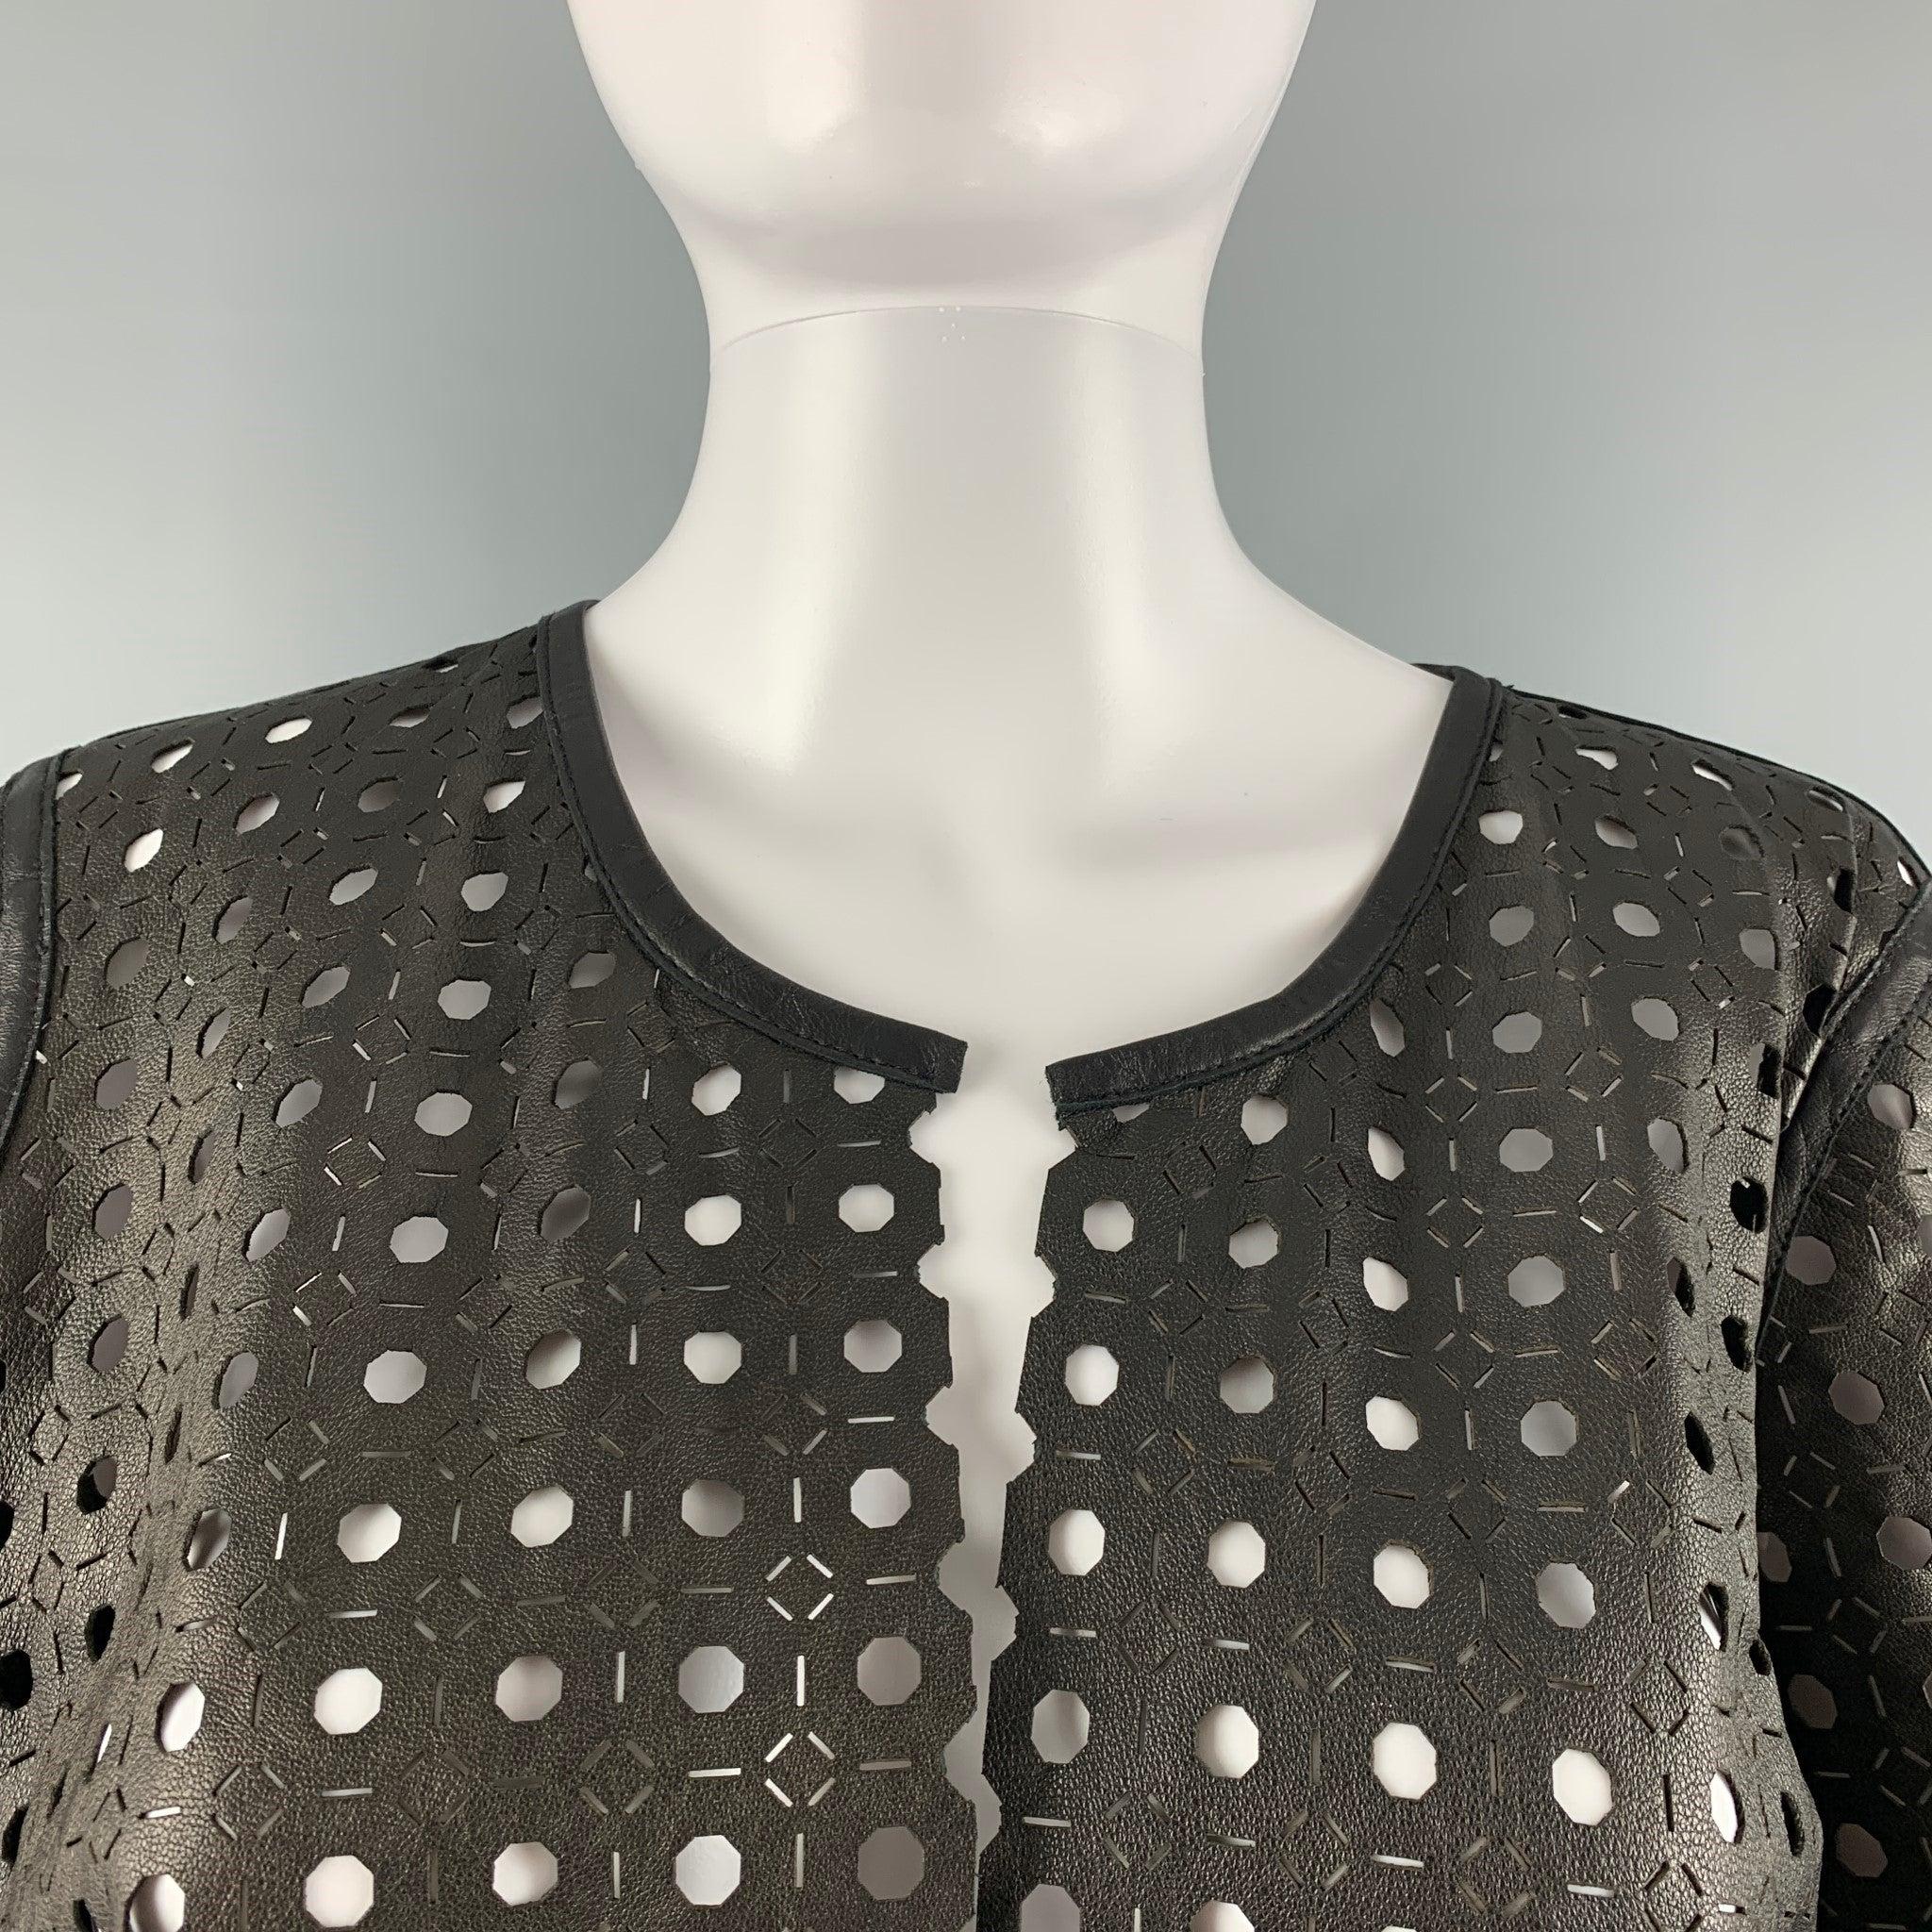 MILLY cropped jacket comes in a black lamb skin leather featuring laser cut texture, 3/4 sleeves and an open front closure. Made in USA.Excellent Pre-Owned Condition. 

Marked:   M 

Measurements: 
 
Shoulder: 16 inches  Bust: 38 inches  Sleeve: 15